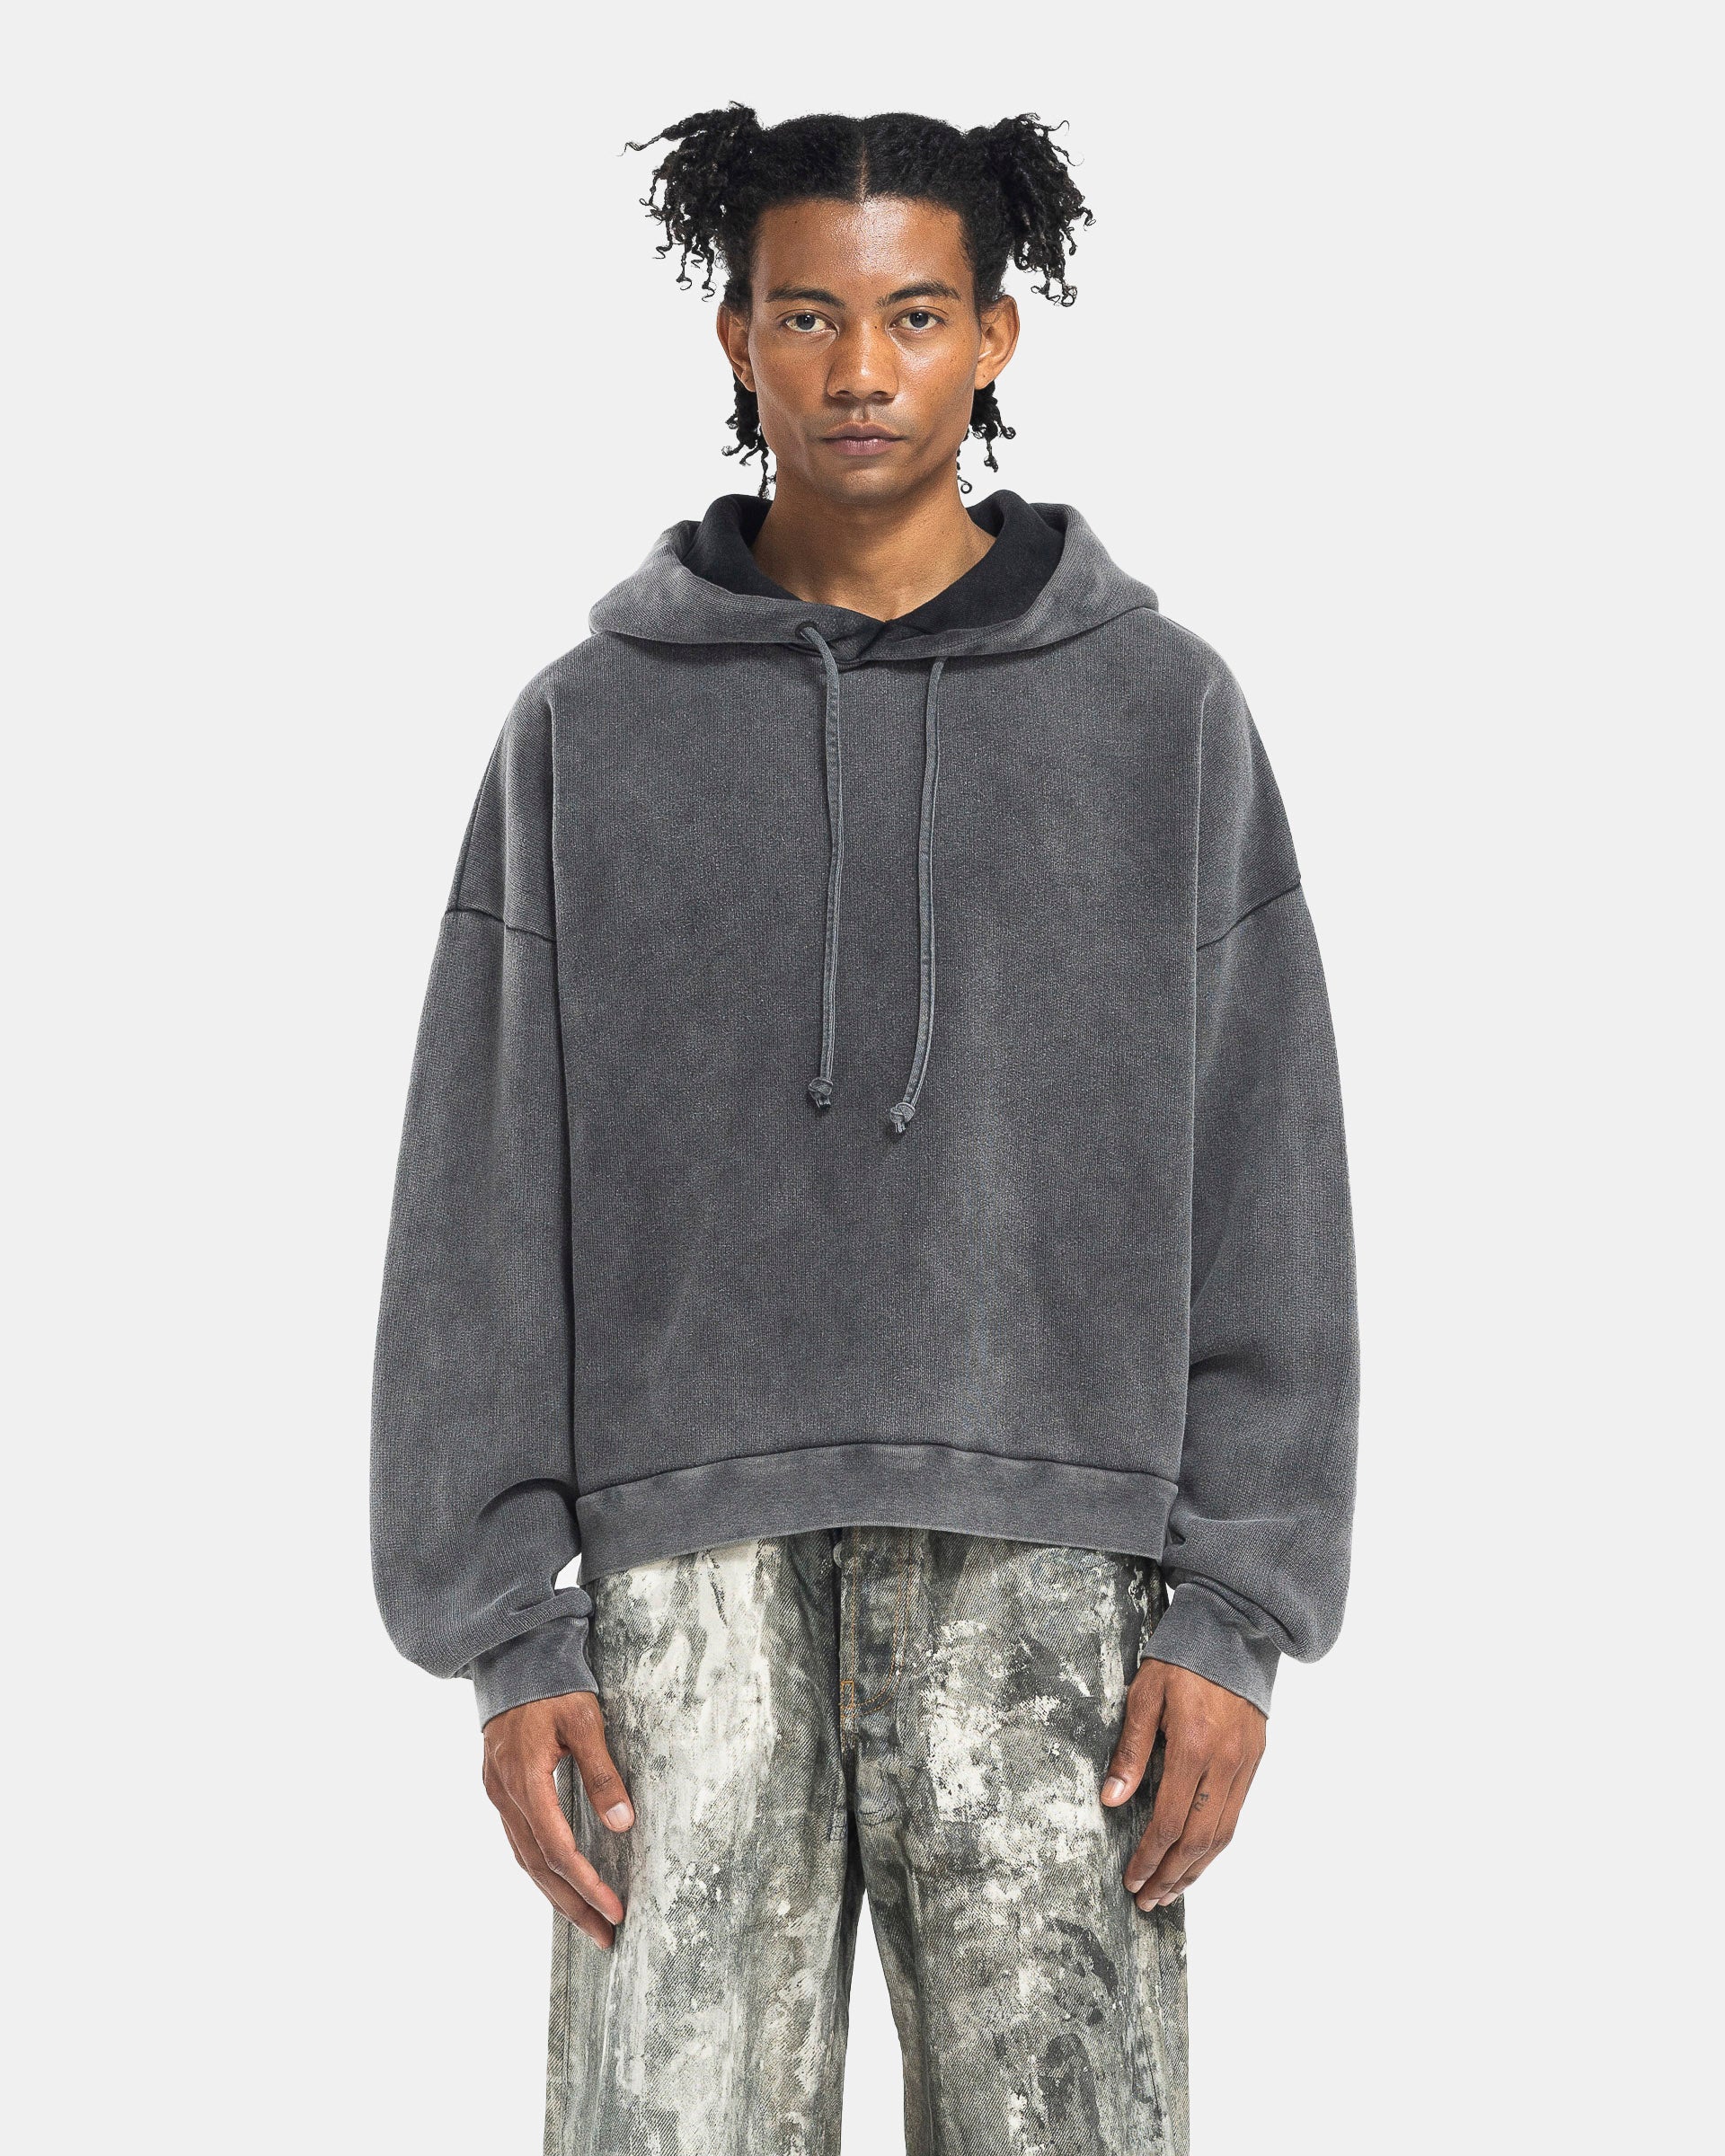 Model wearing Acne Studios Hooded Sweater in Faded Black on the white background